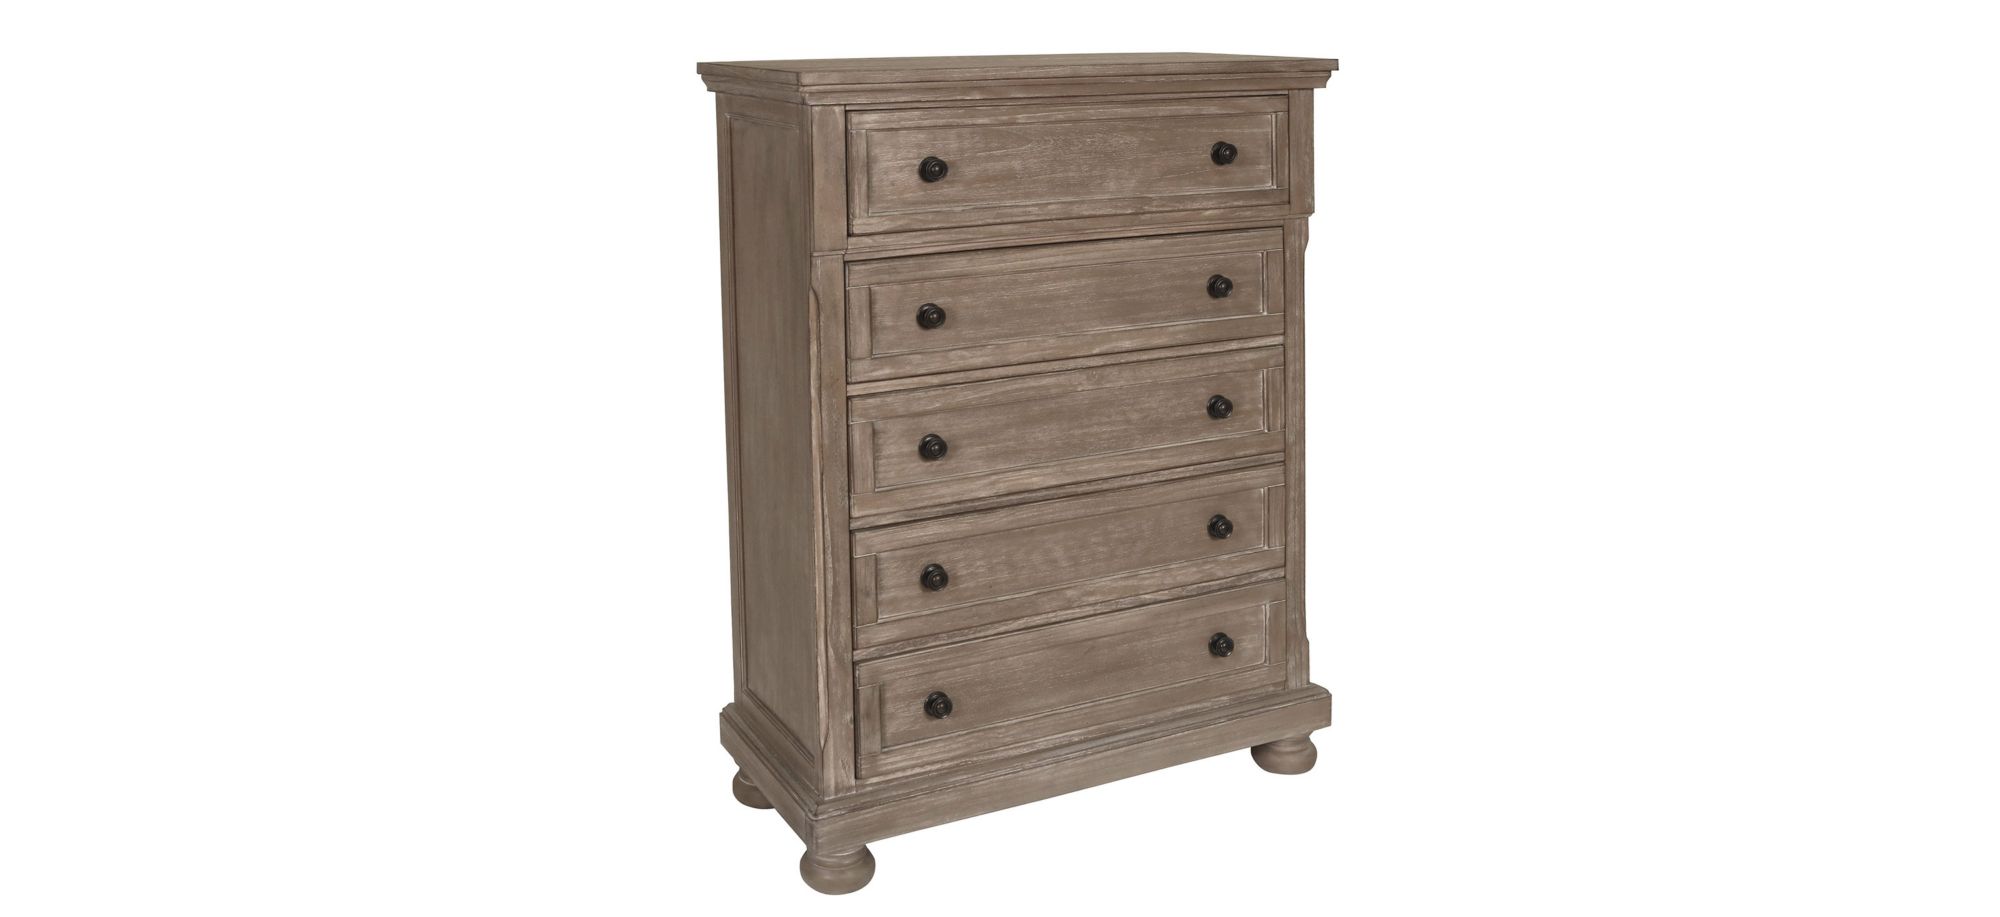 Allegra Bedroom Chest in Pewter by New Classic Home Furnishings